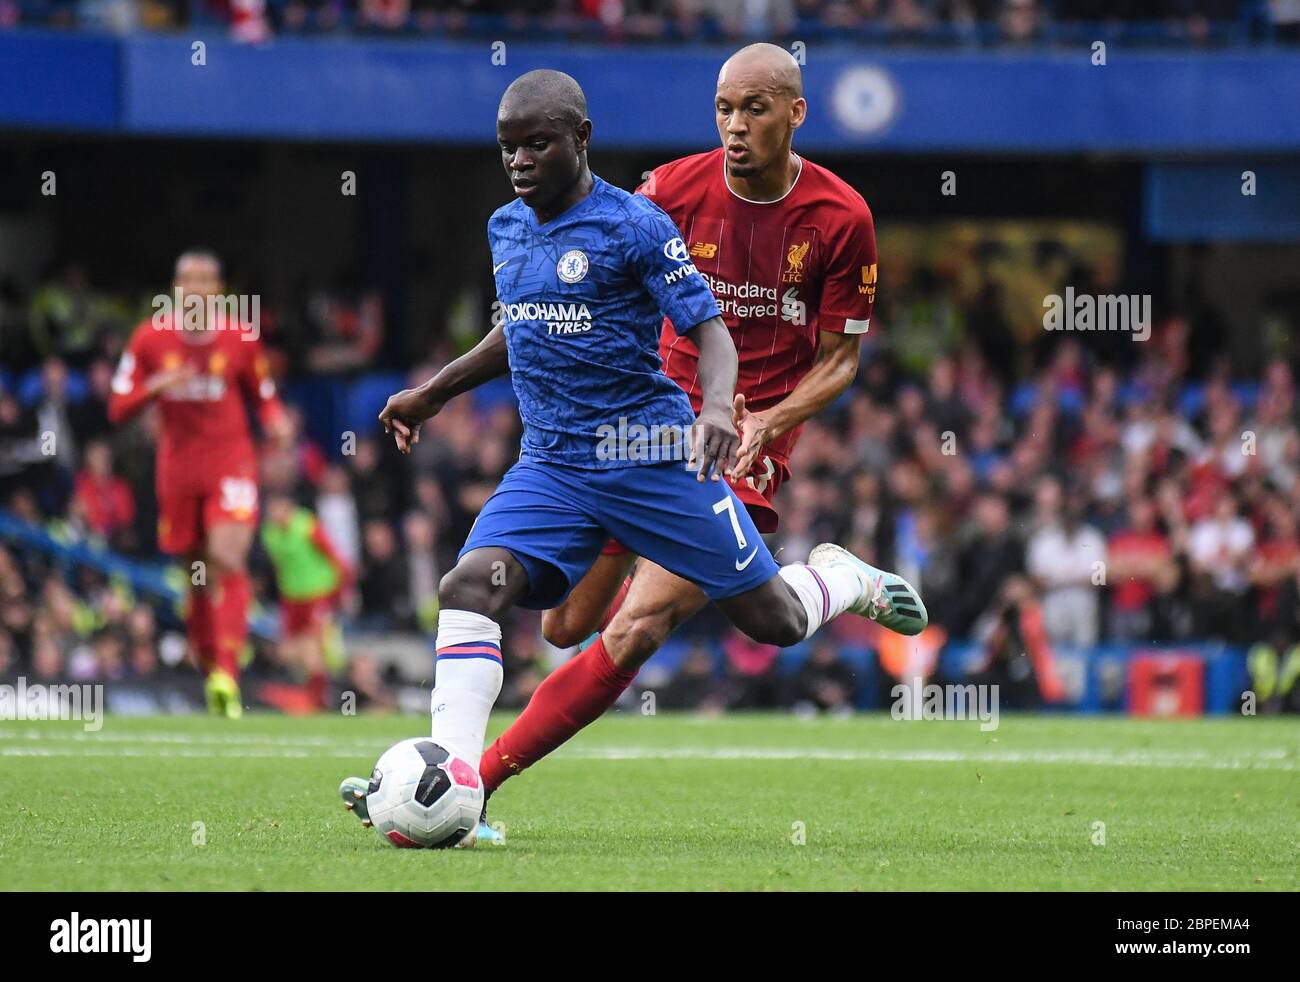 LONDON, ENGLAND - SEPTEMBER 22, 2019: N'Golo Kante of Chelsea (front) and Fabio Henrique Tavares (Fabinho) of Liverpool (back) pictured during the 2019/20 Premier League game between Chelsea FC and Liverpool FC at Stamford Bridge. Stock Photo